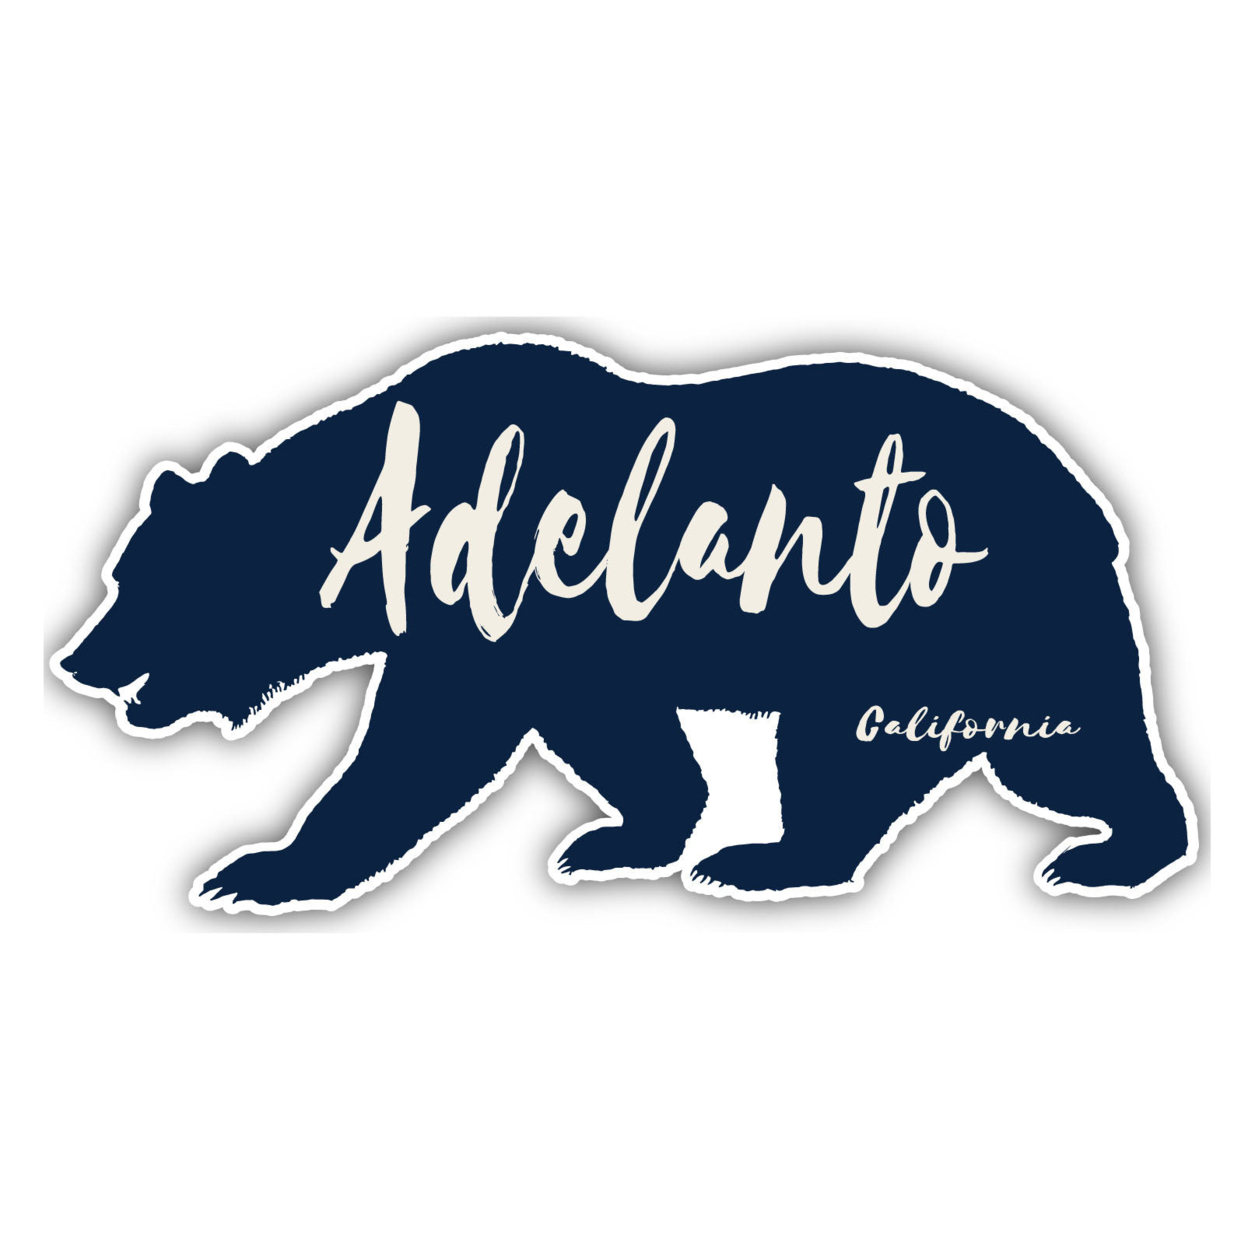 Adelanto California Souvenir Decorative Stickers (Choose Theme And Size) - 4-Pack, 4-Inch, Bear